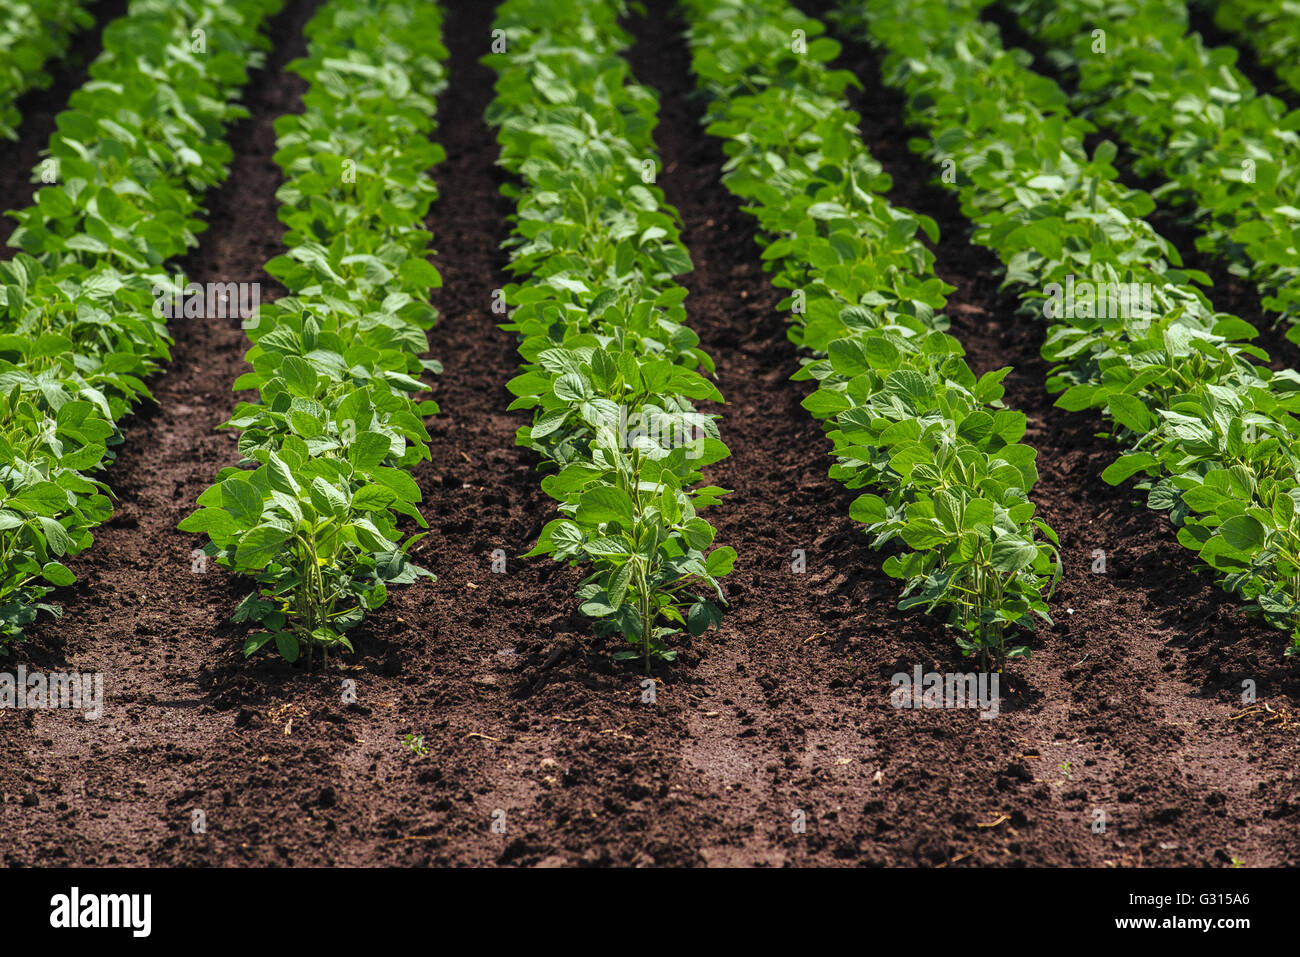 Rows of cultivated soy bean crops in field Stock Photo